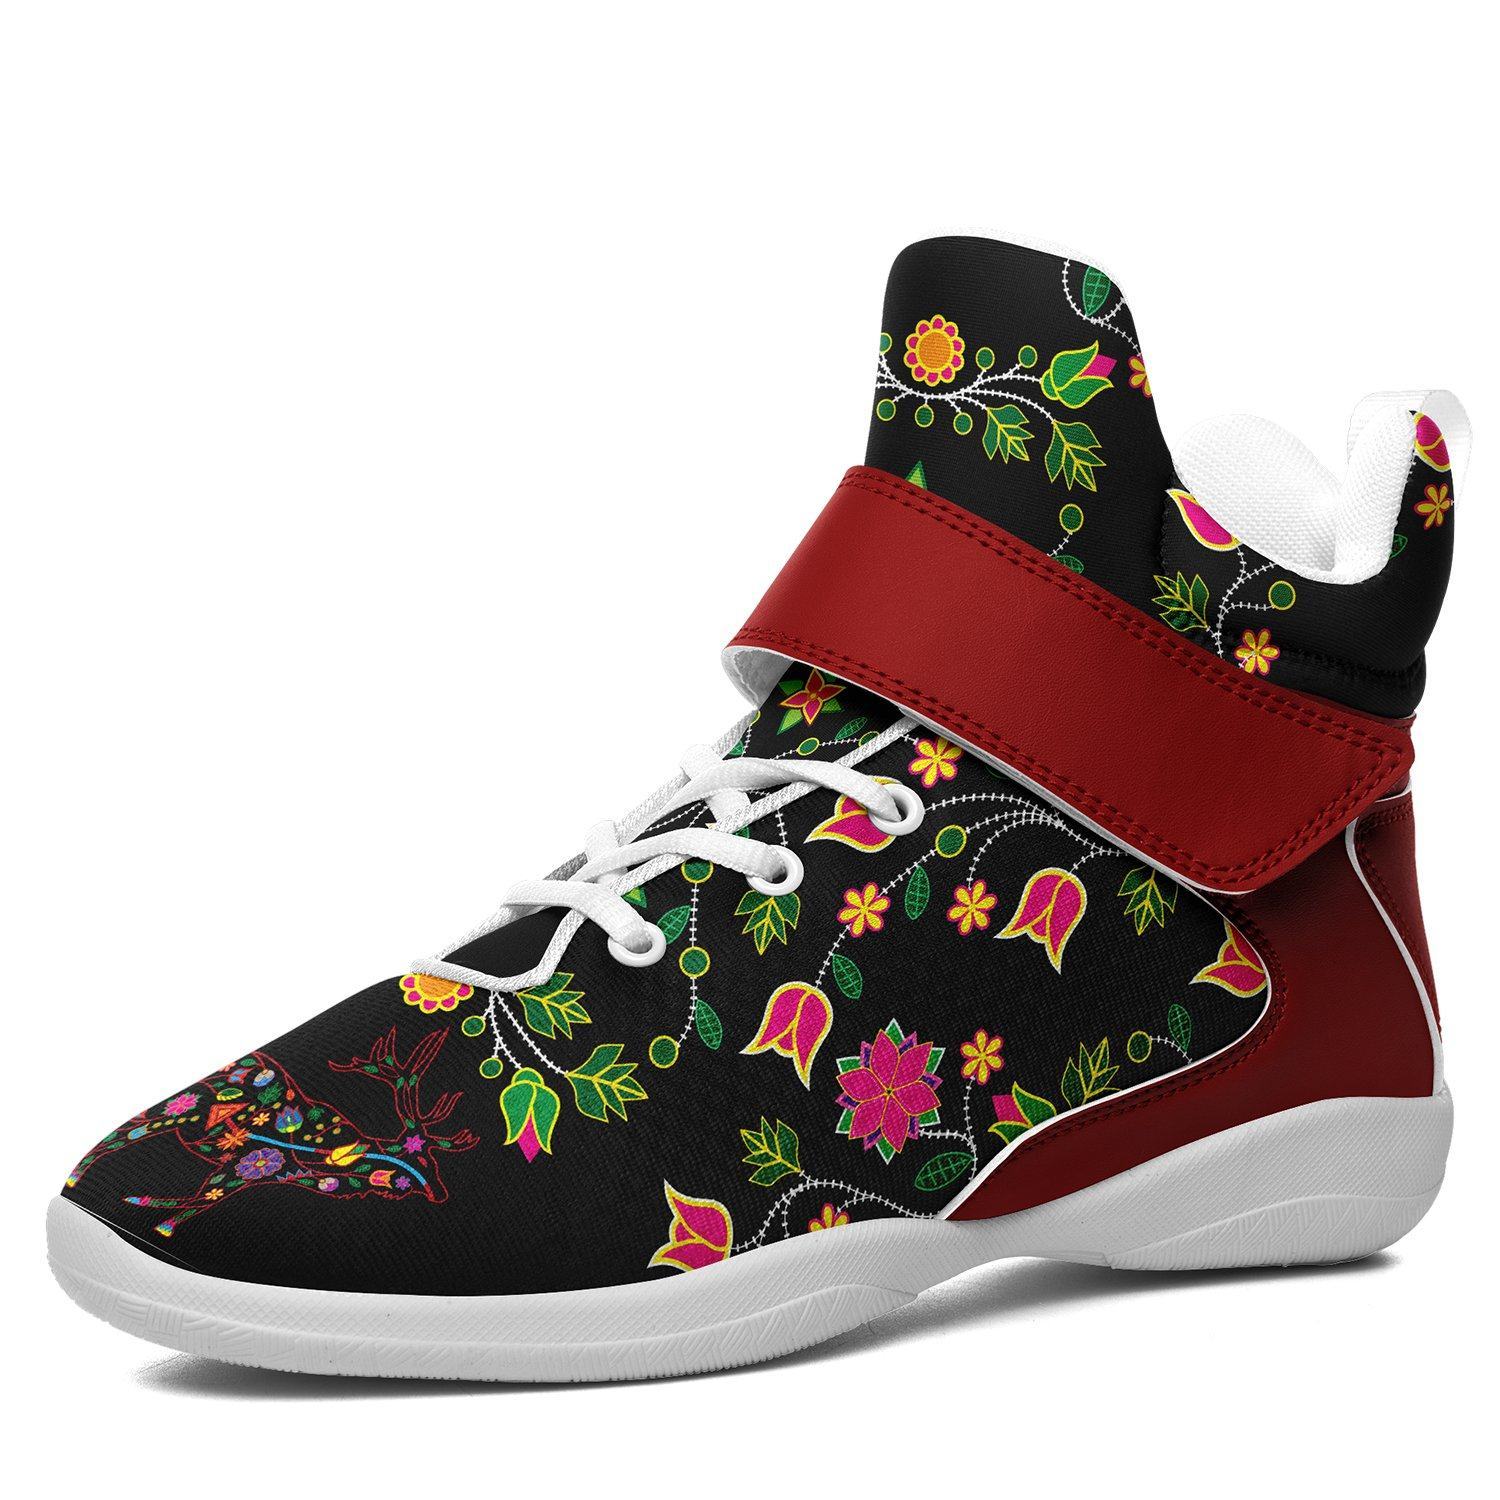 Floral Elk Ipottaa Basketball / Sport High Top Shoes - White Sole 49 Dzine US Men 7 / EUR 40 White Sole with Dark Red Strap 